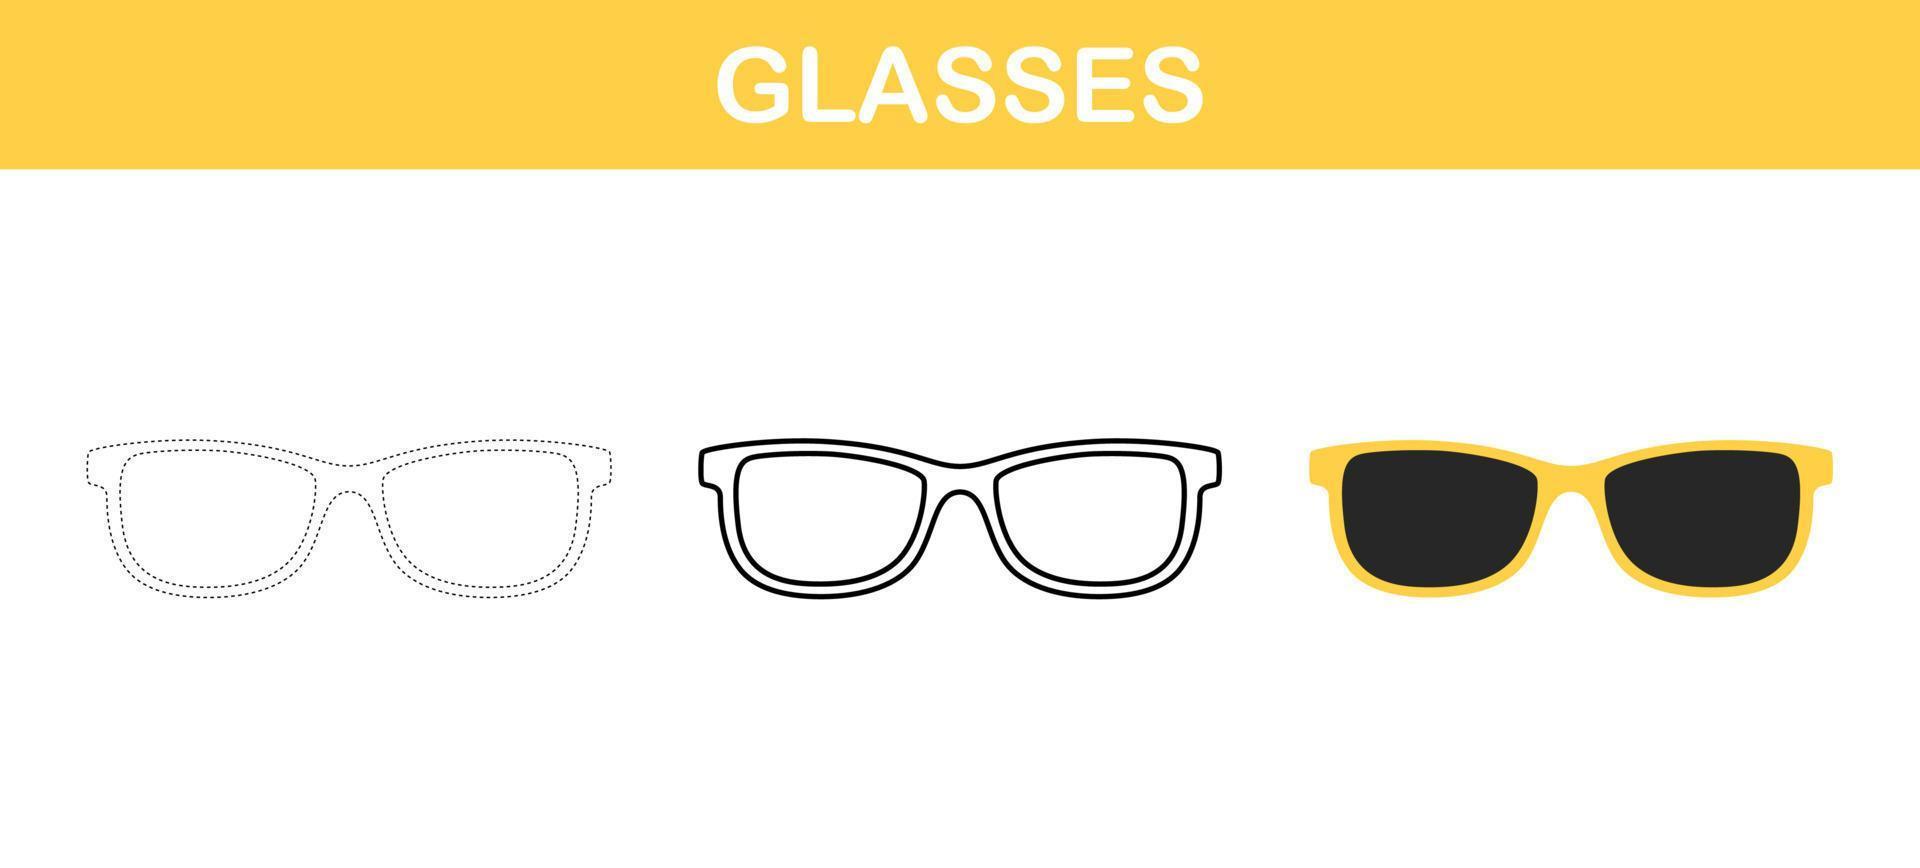 Glasses tracing and coloring worksheet for kids vector